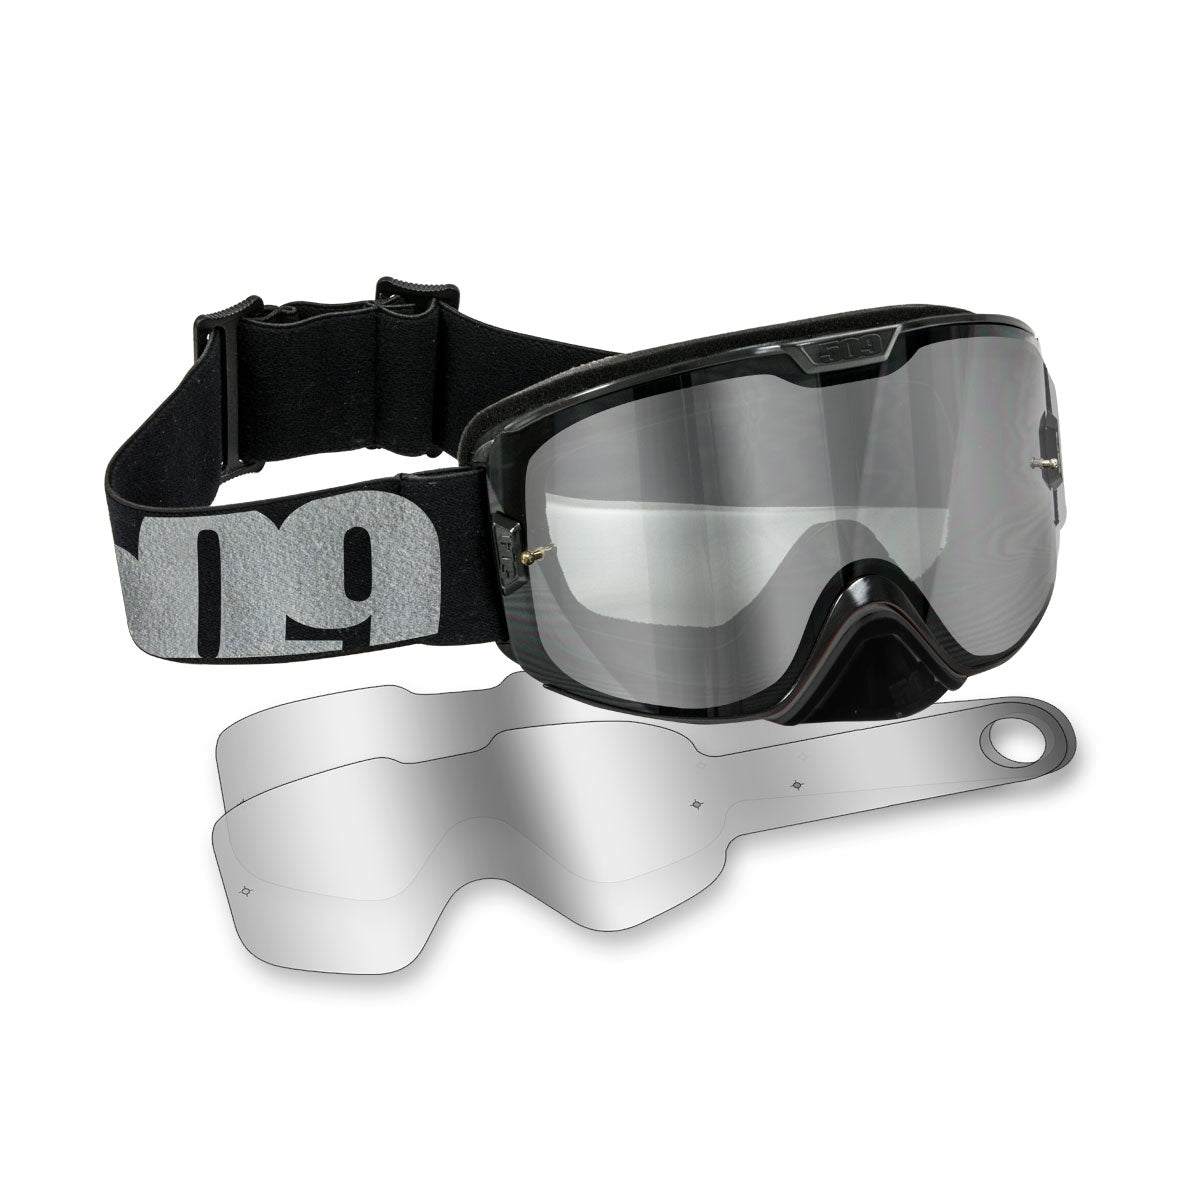 What is a Tear Off Goggle Lens?